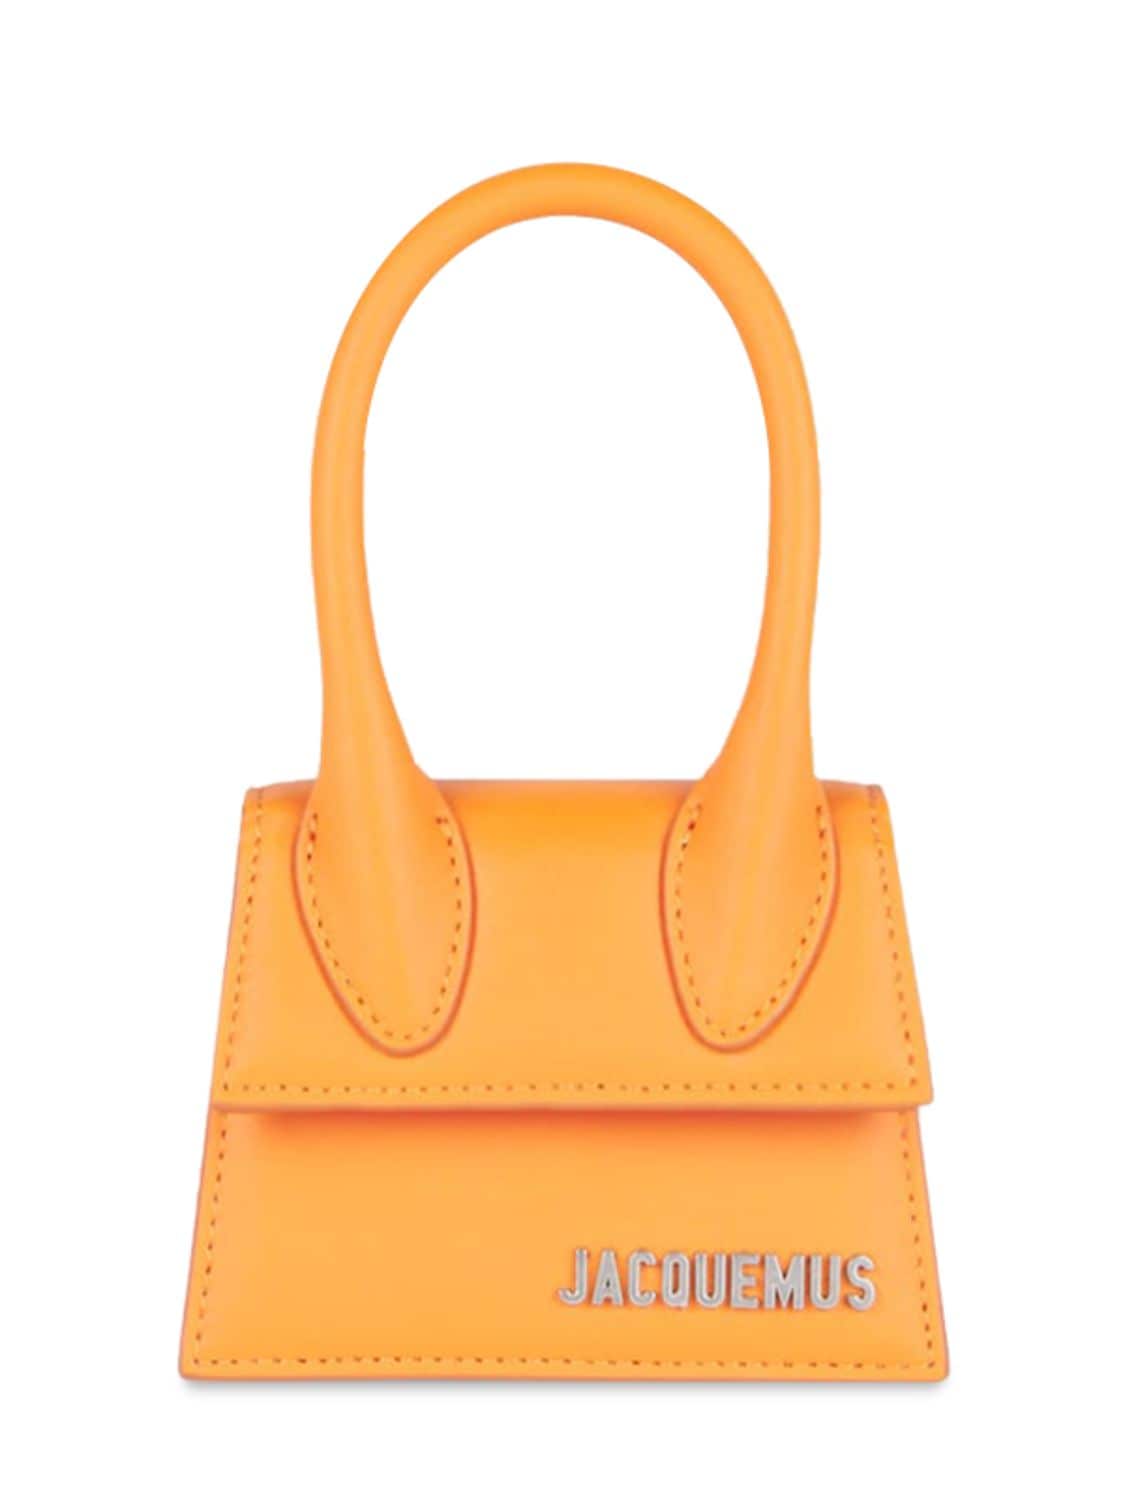 Jacquemus Le Chiquito Homme Leather Crossbody Bag In Orange